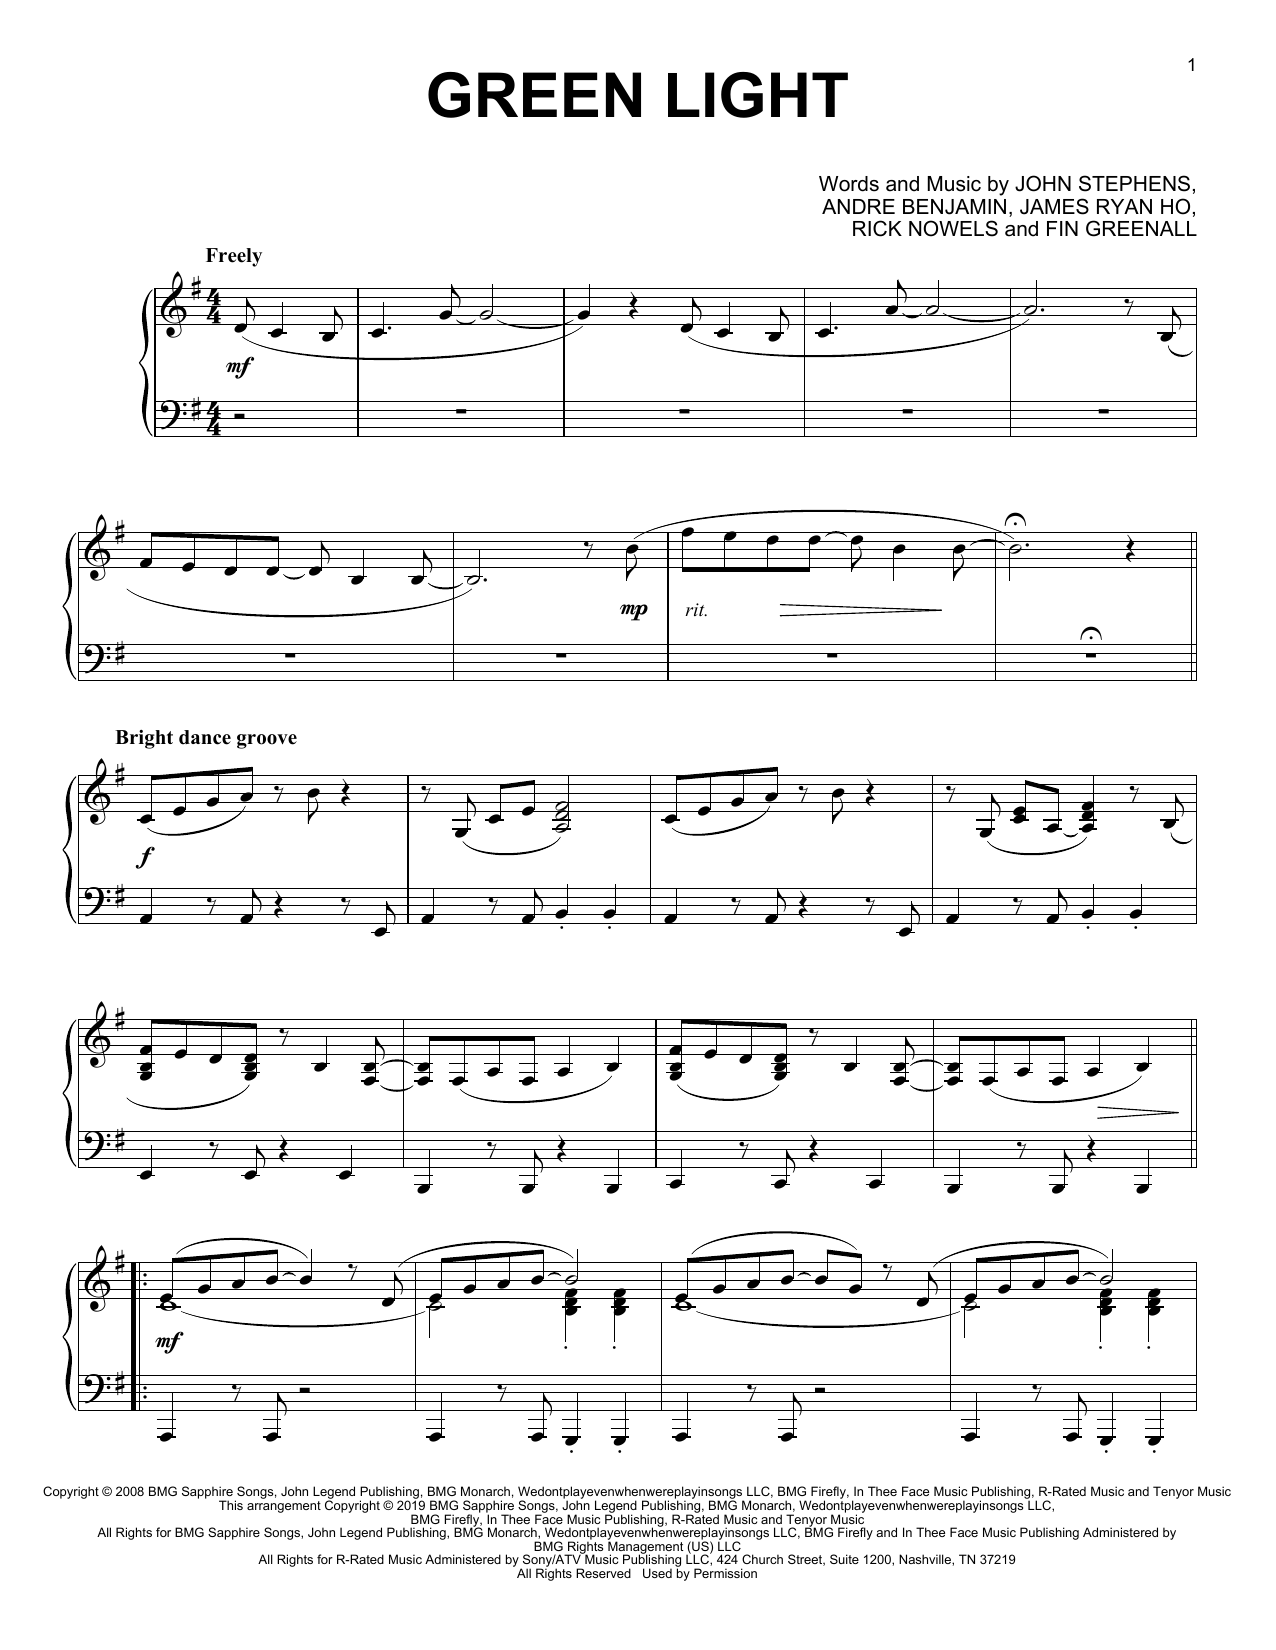 Pacific forberede zone John Legend "Green Light (feat. Andre 3000)" Sheet Music Notes | Download  Printable PDF Score 414547